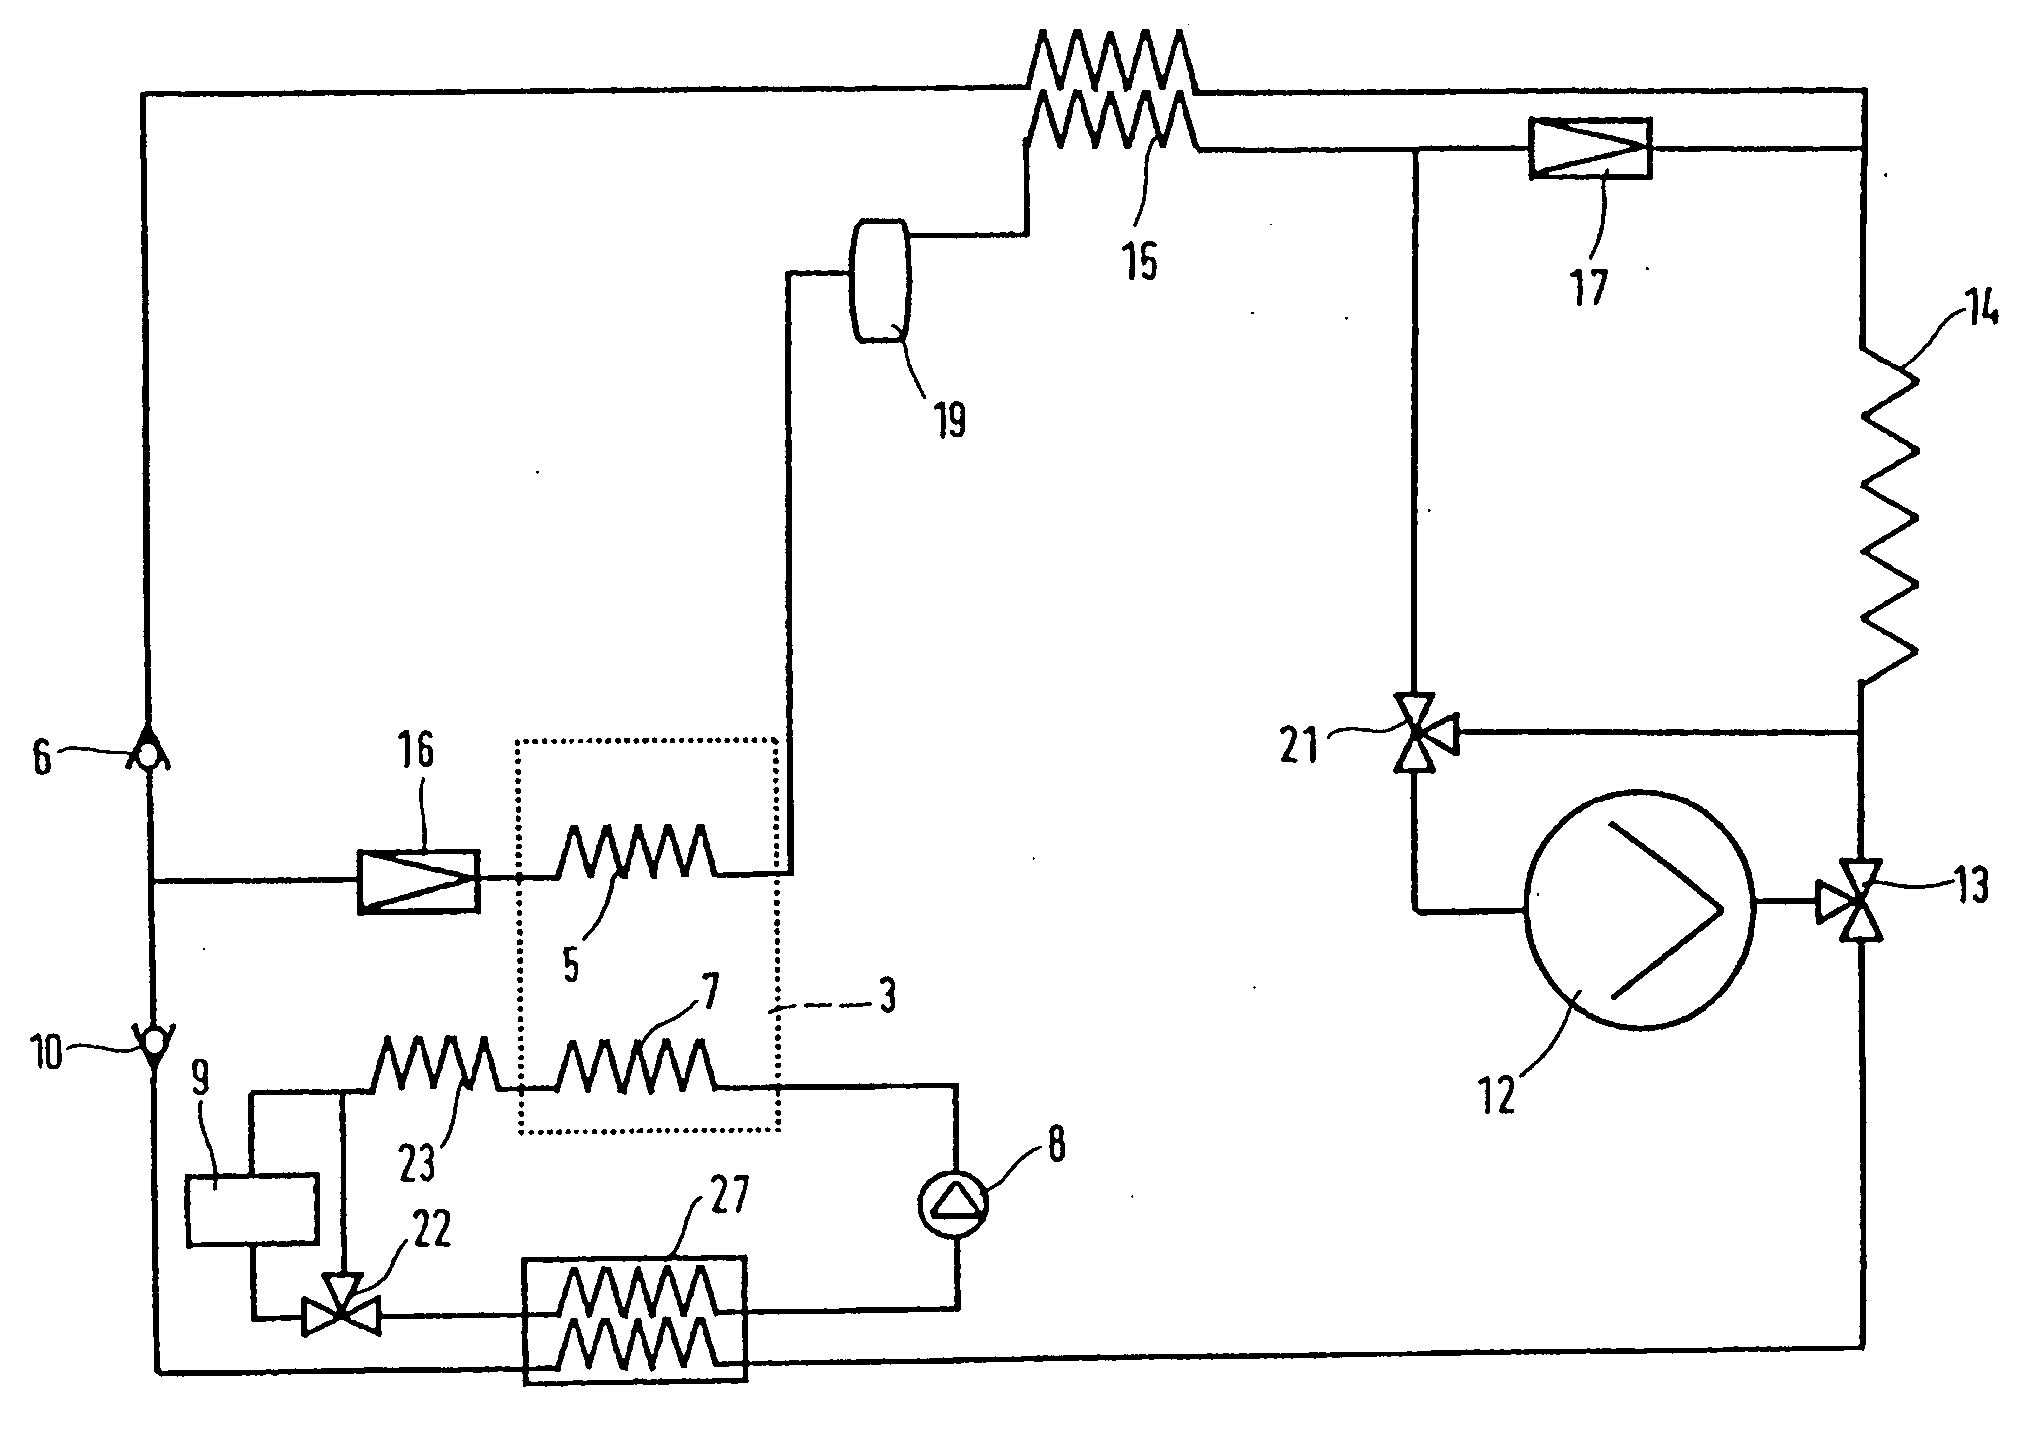 Air-conditioning system for a motor vehicle